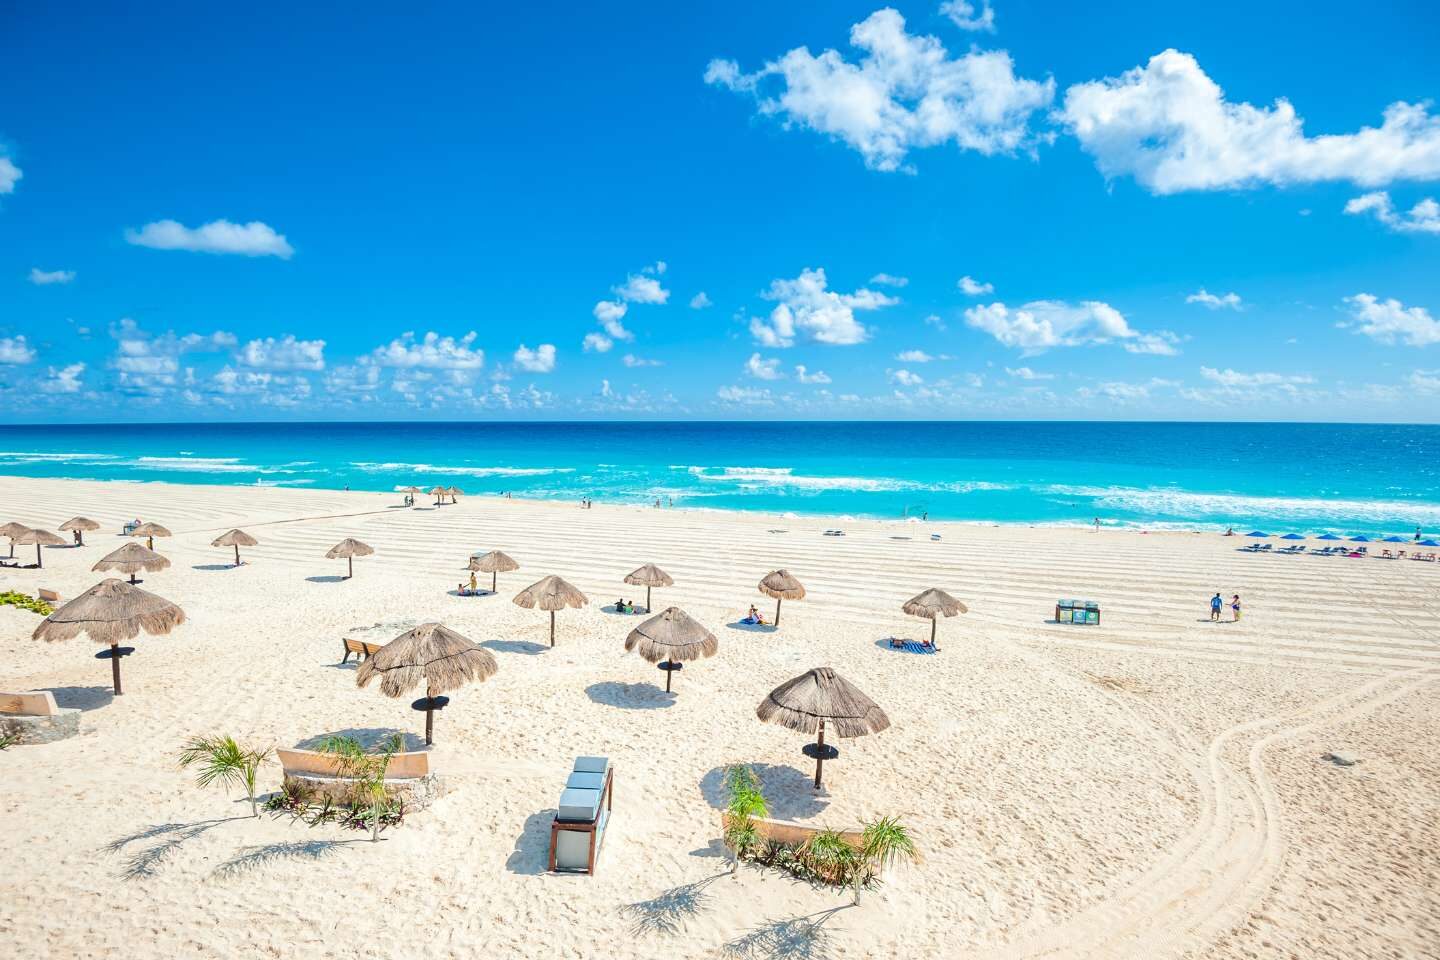 A beautiful sunny weather in Cancun, Mexico